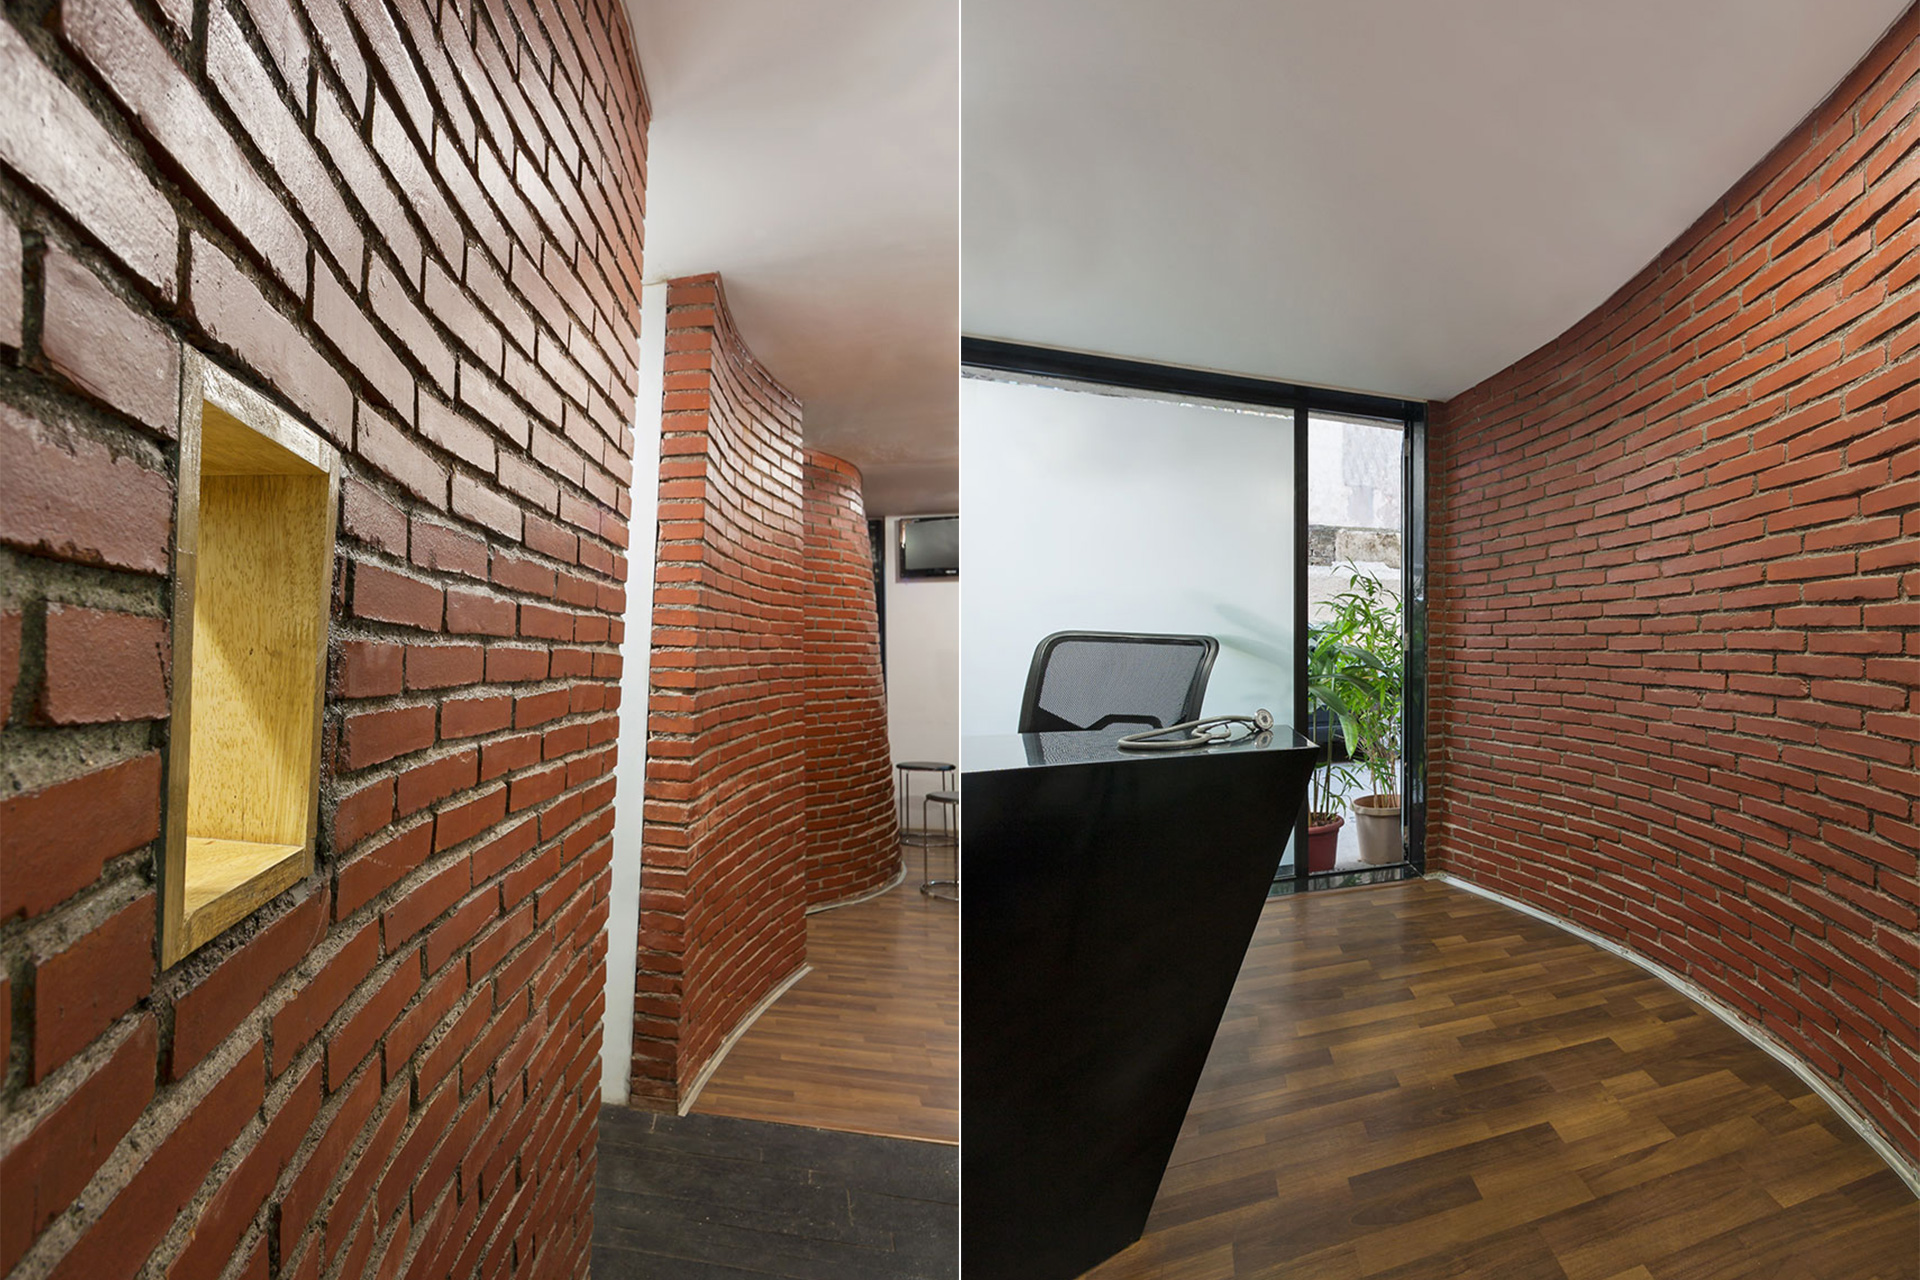 The doubly curved wire-cut brick walls were conceived to break the linearity of the space. The double curve allowed more space on either side of the wall as the functions demanded. The curvature is further accentuated with the false ceiling getting offset from the brick wall.